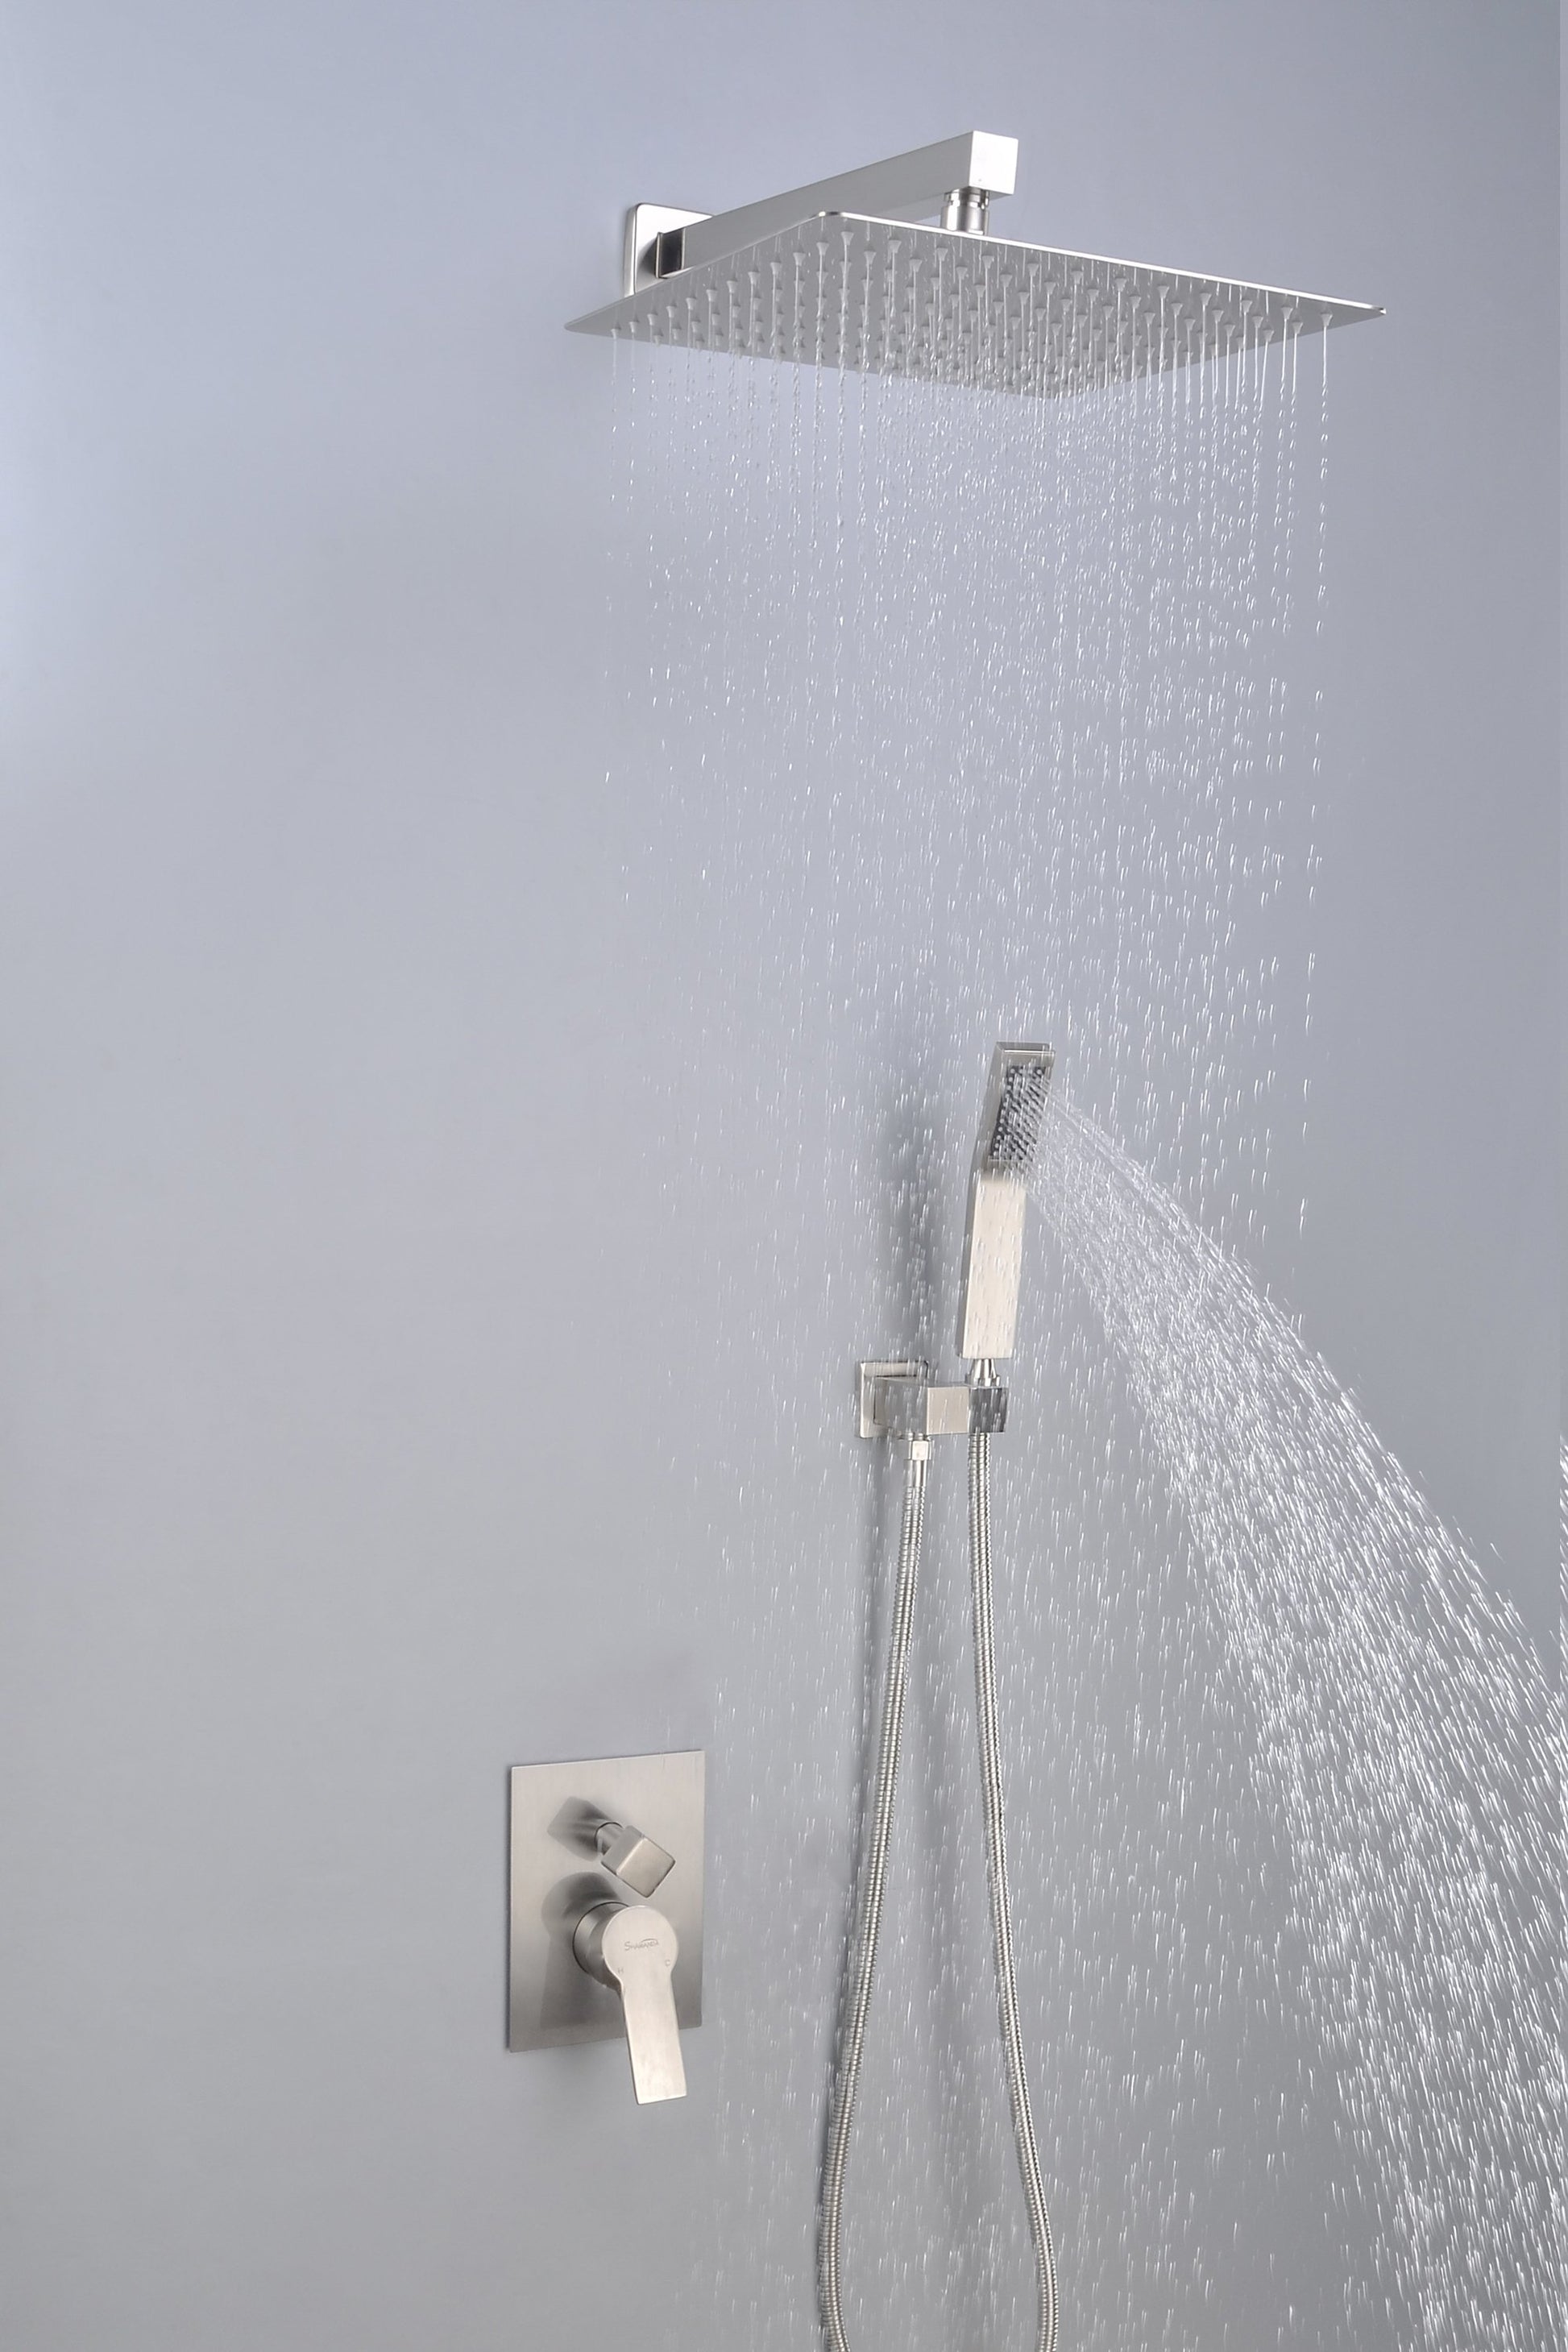 1-Spray Patterns with 2.66 GPM 12 in. Wall Mount Dual Shower Heads with Rough-In Valve Body and Trim in Brushed Nickel - Alipuinc